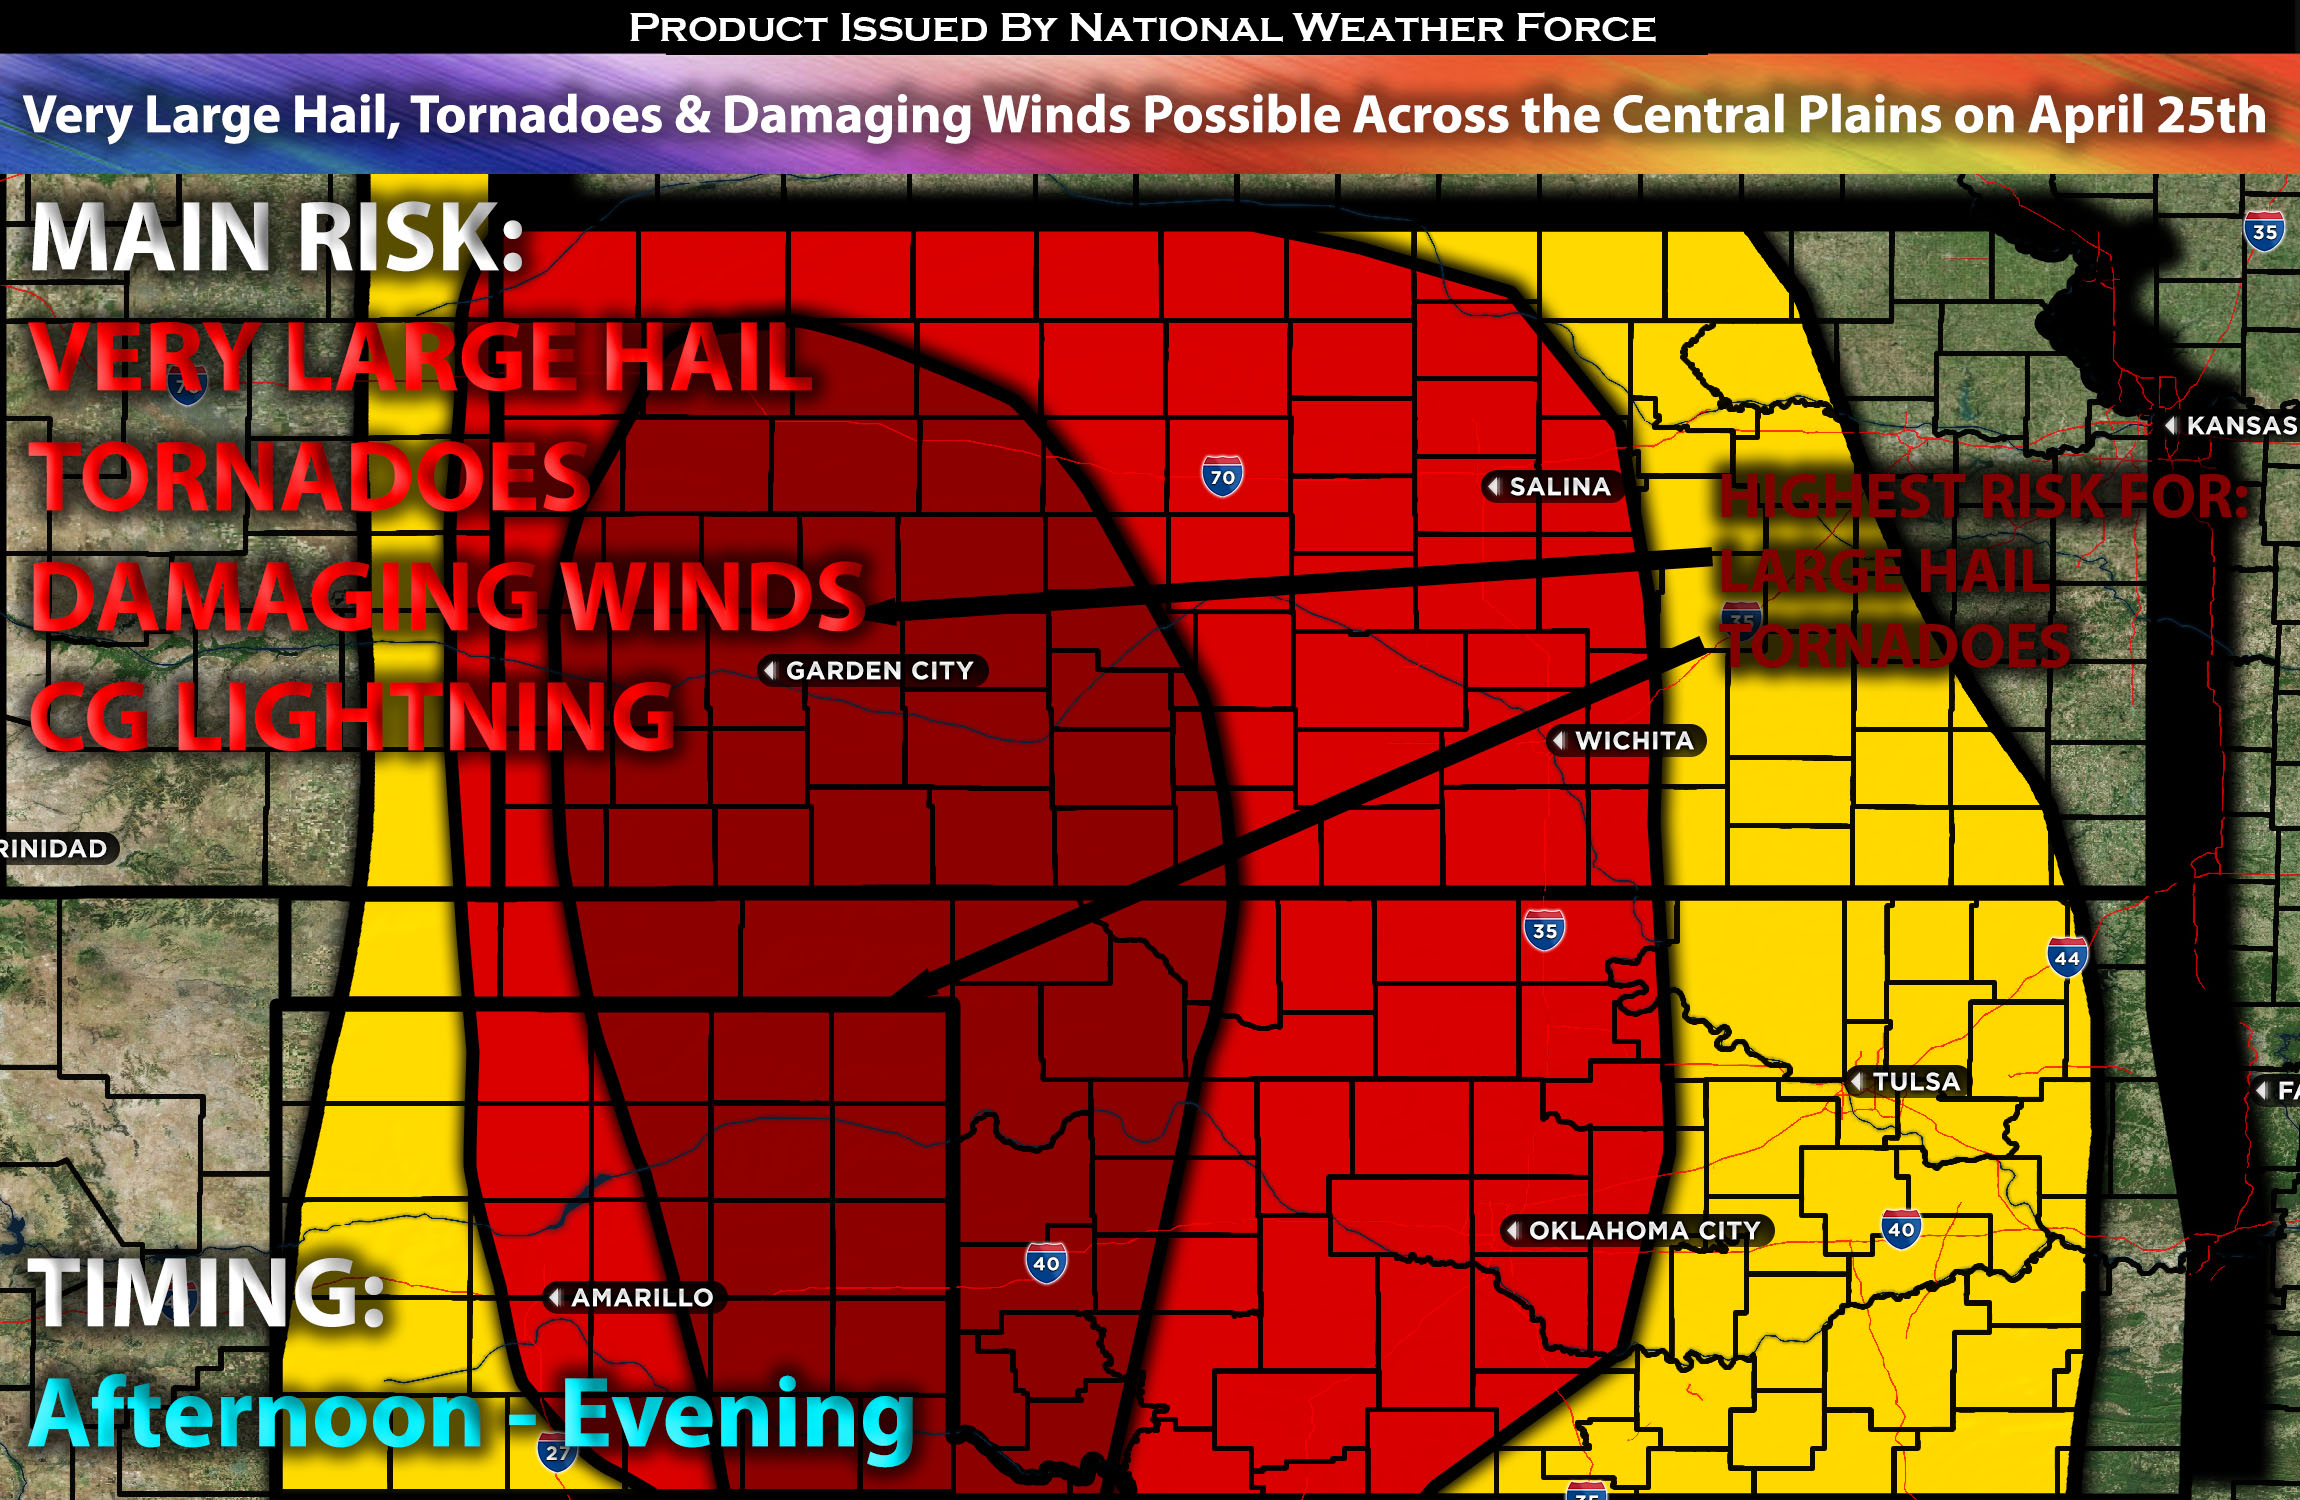 Very Large Hail, Tornadoes & Damaging Winds Possible Across the Central Plains on April 25th